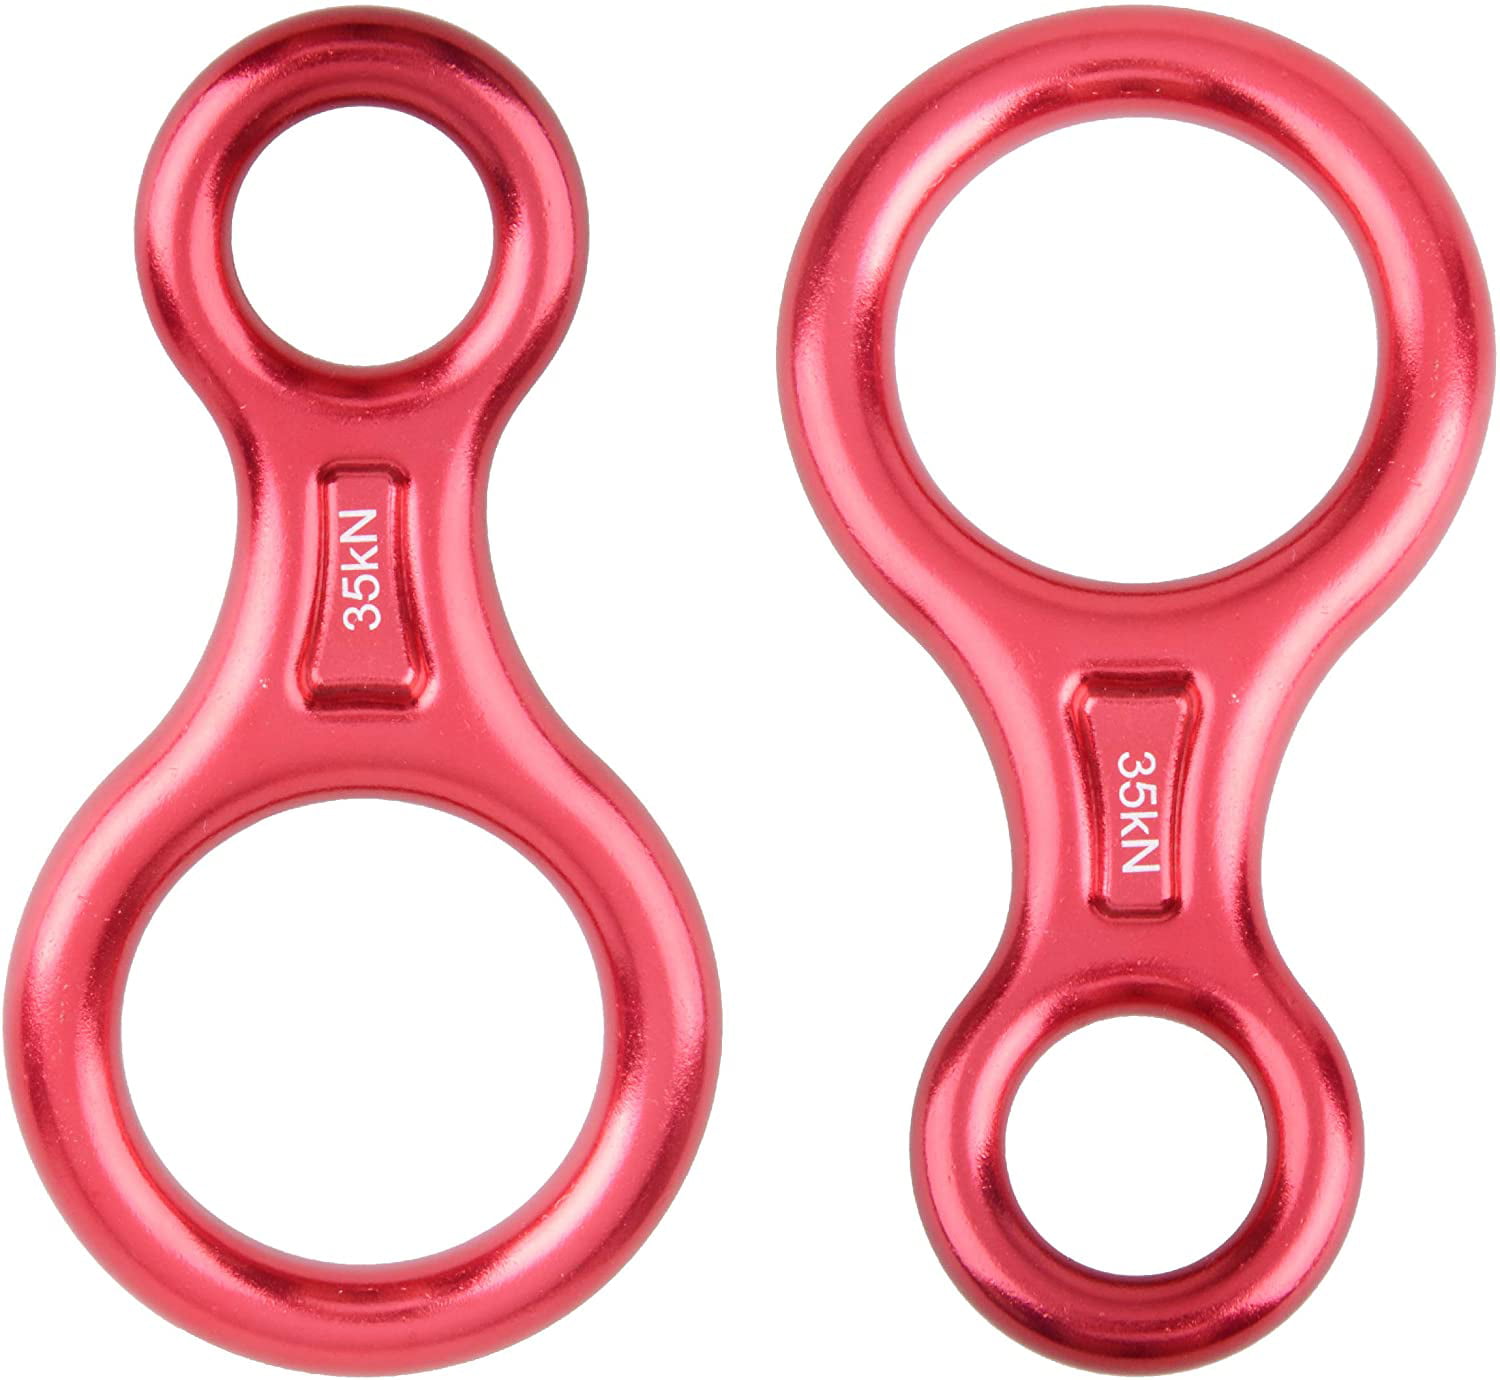 Details about   50KN Rescue Figure 8Descender Large Bent Ear and Rappelling Gear Climbing 